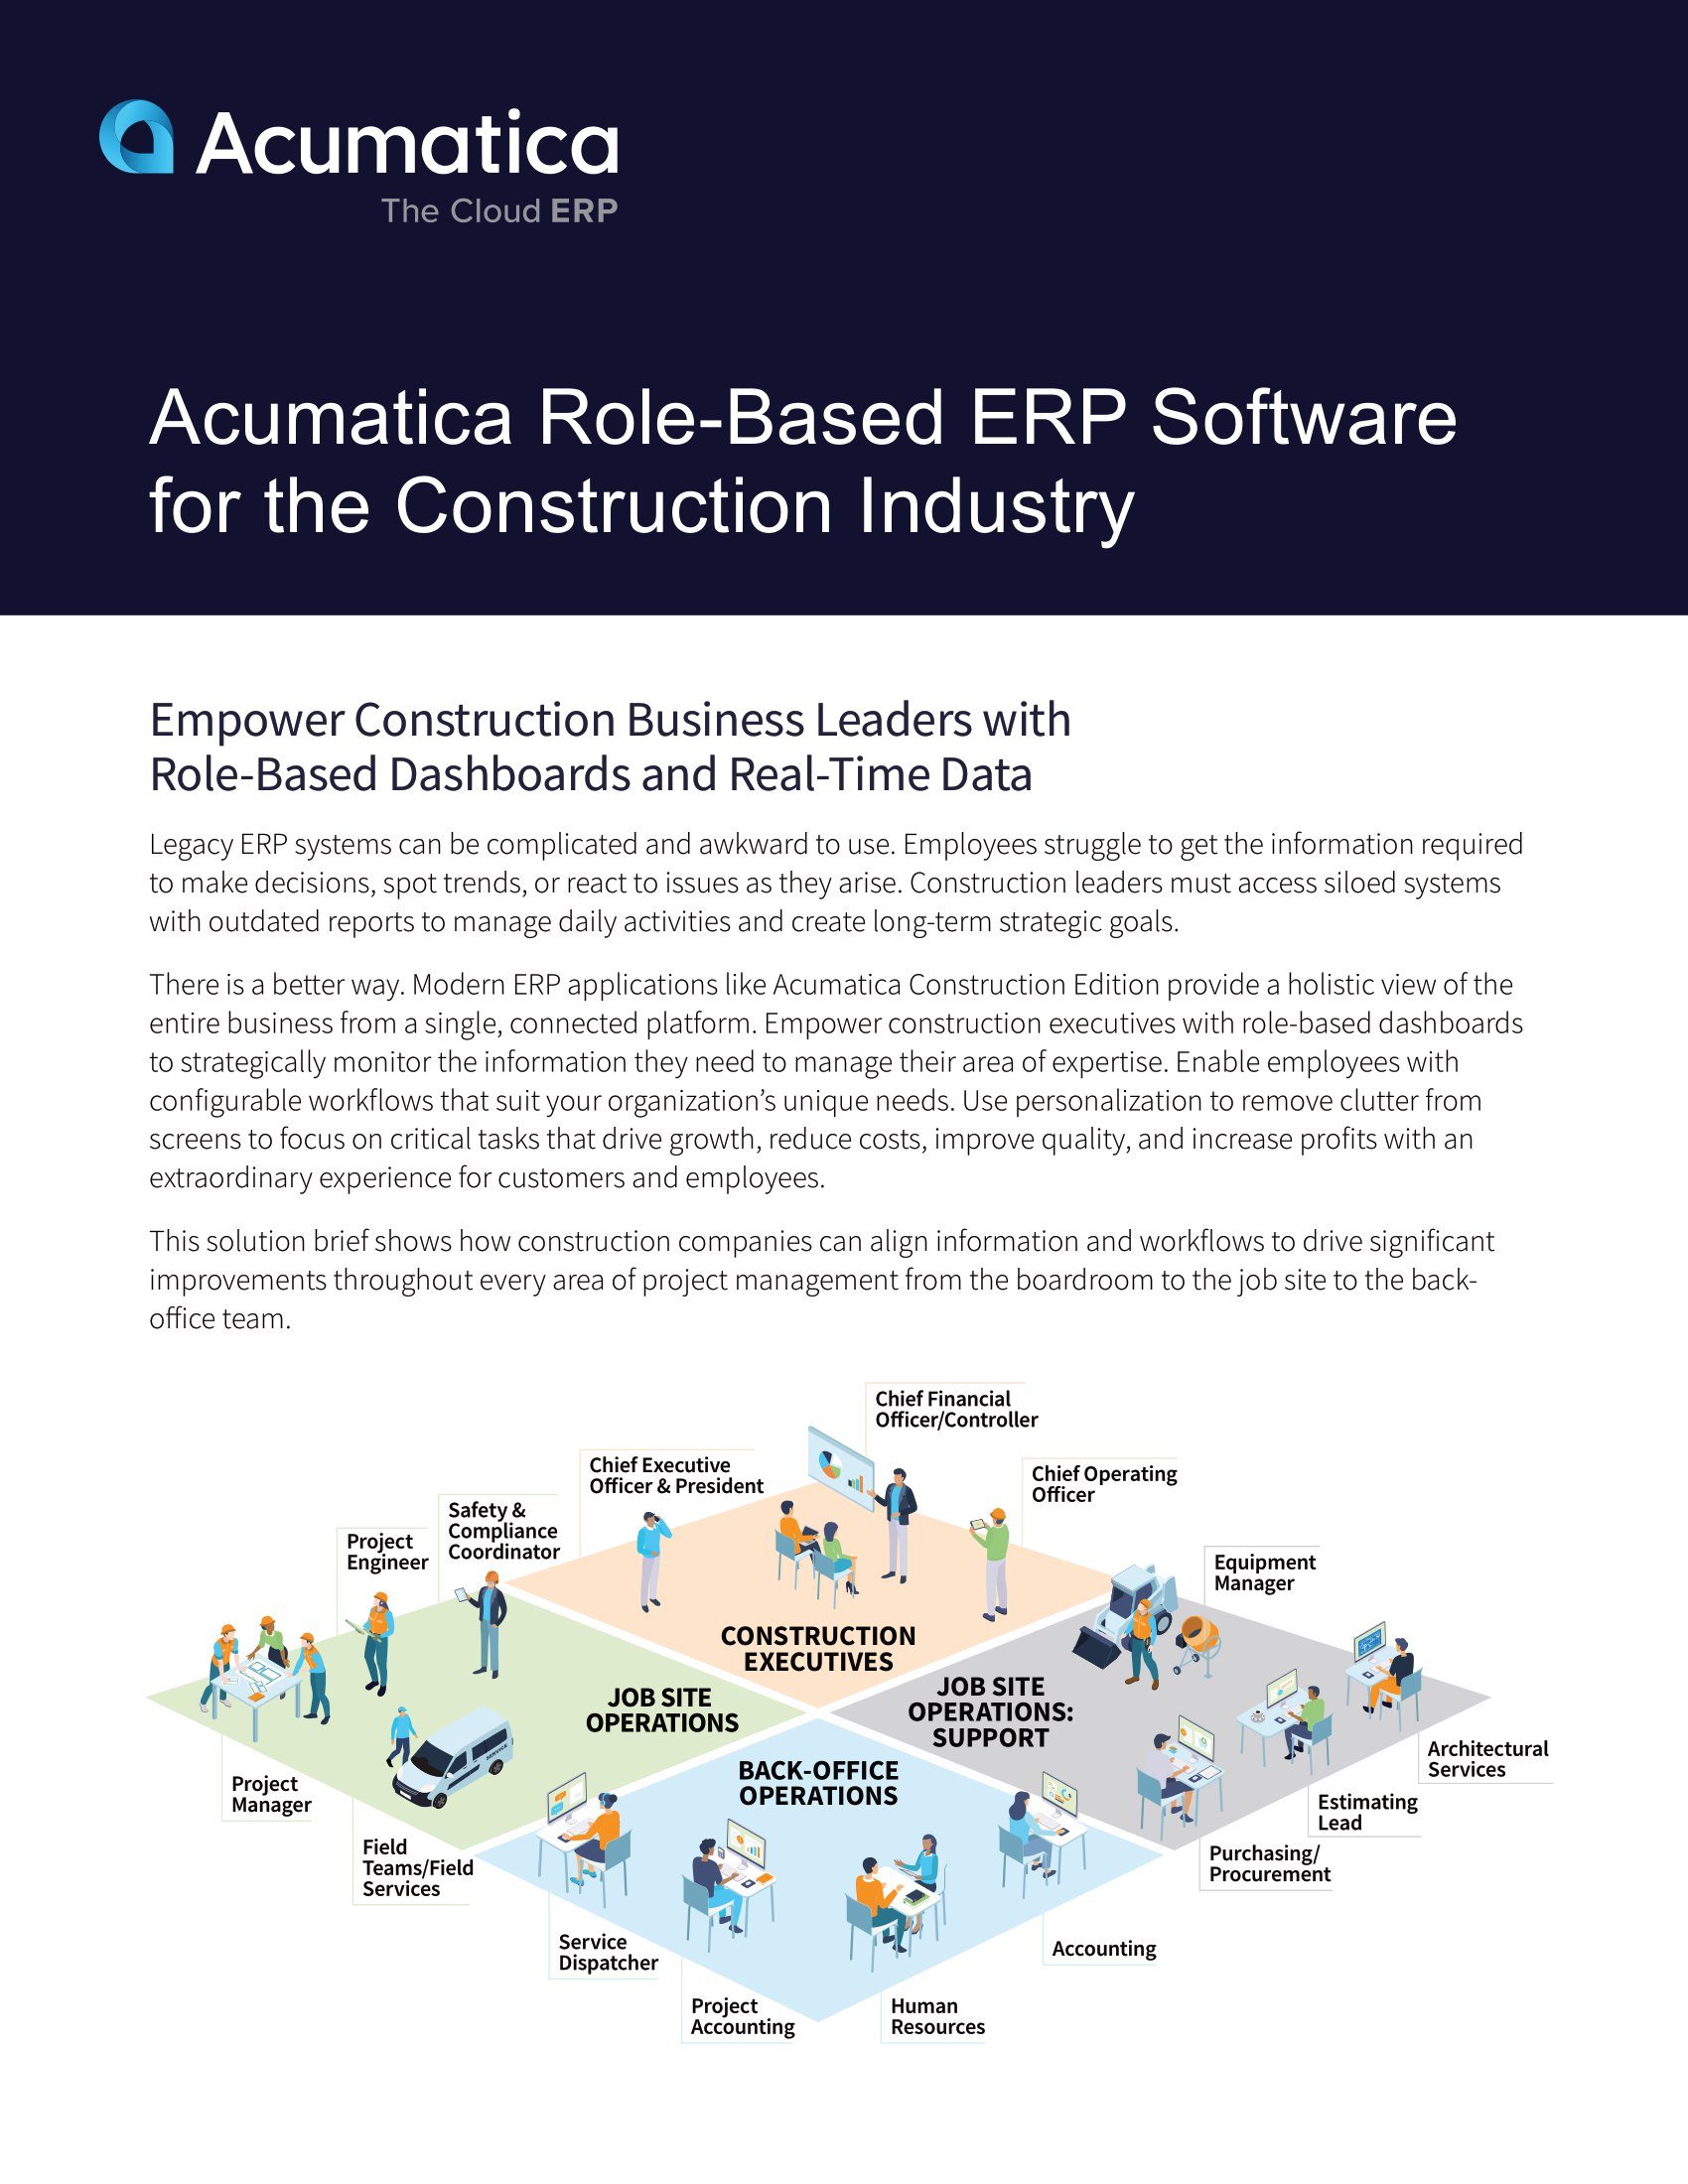 Multiple Construction Roles Only Require One ERP Platform